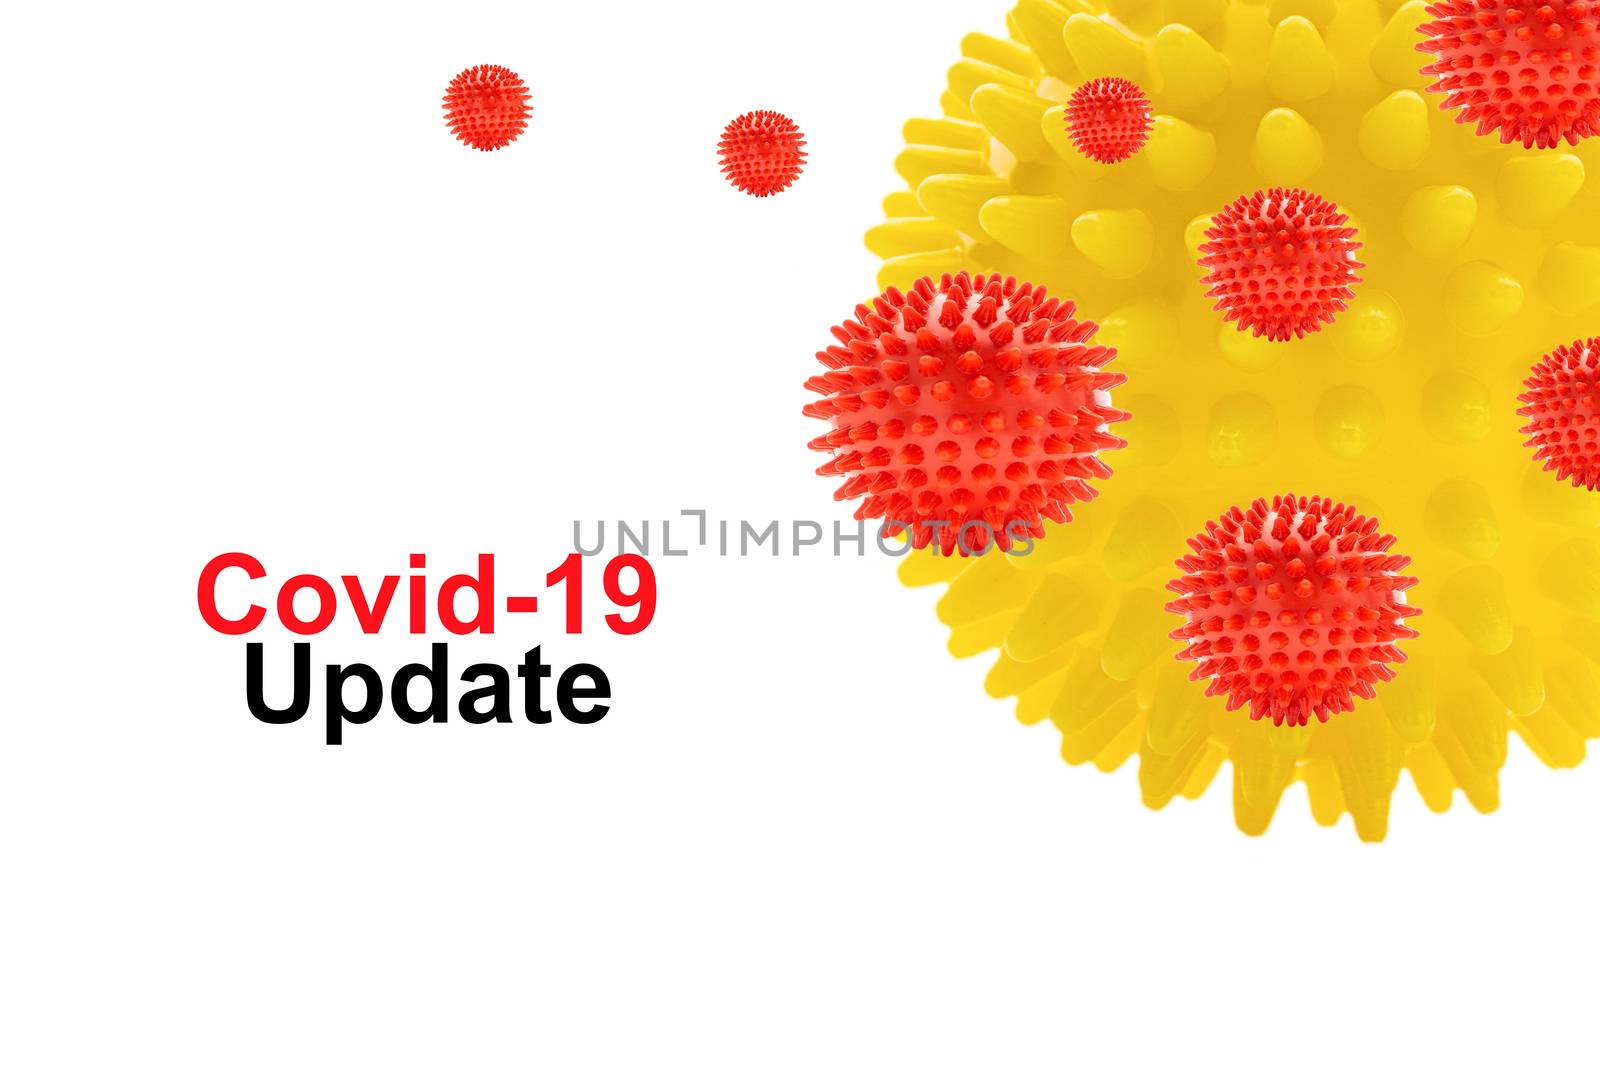 COVID-19 UPDATE text on white background. Covid-19 or Coronavirus